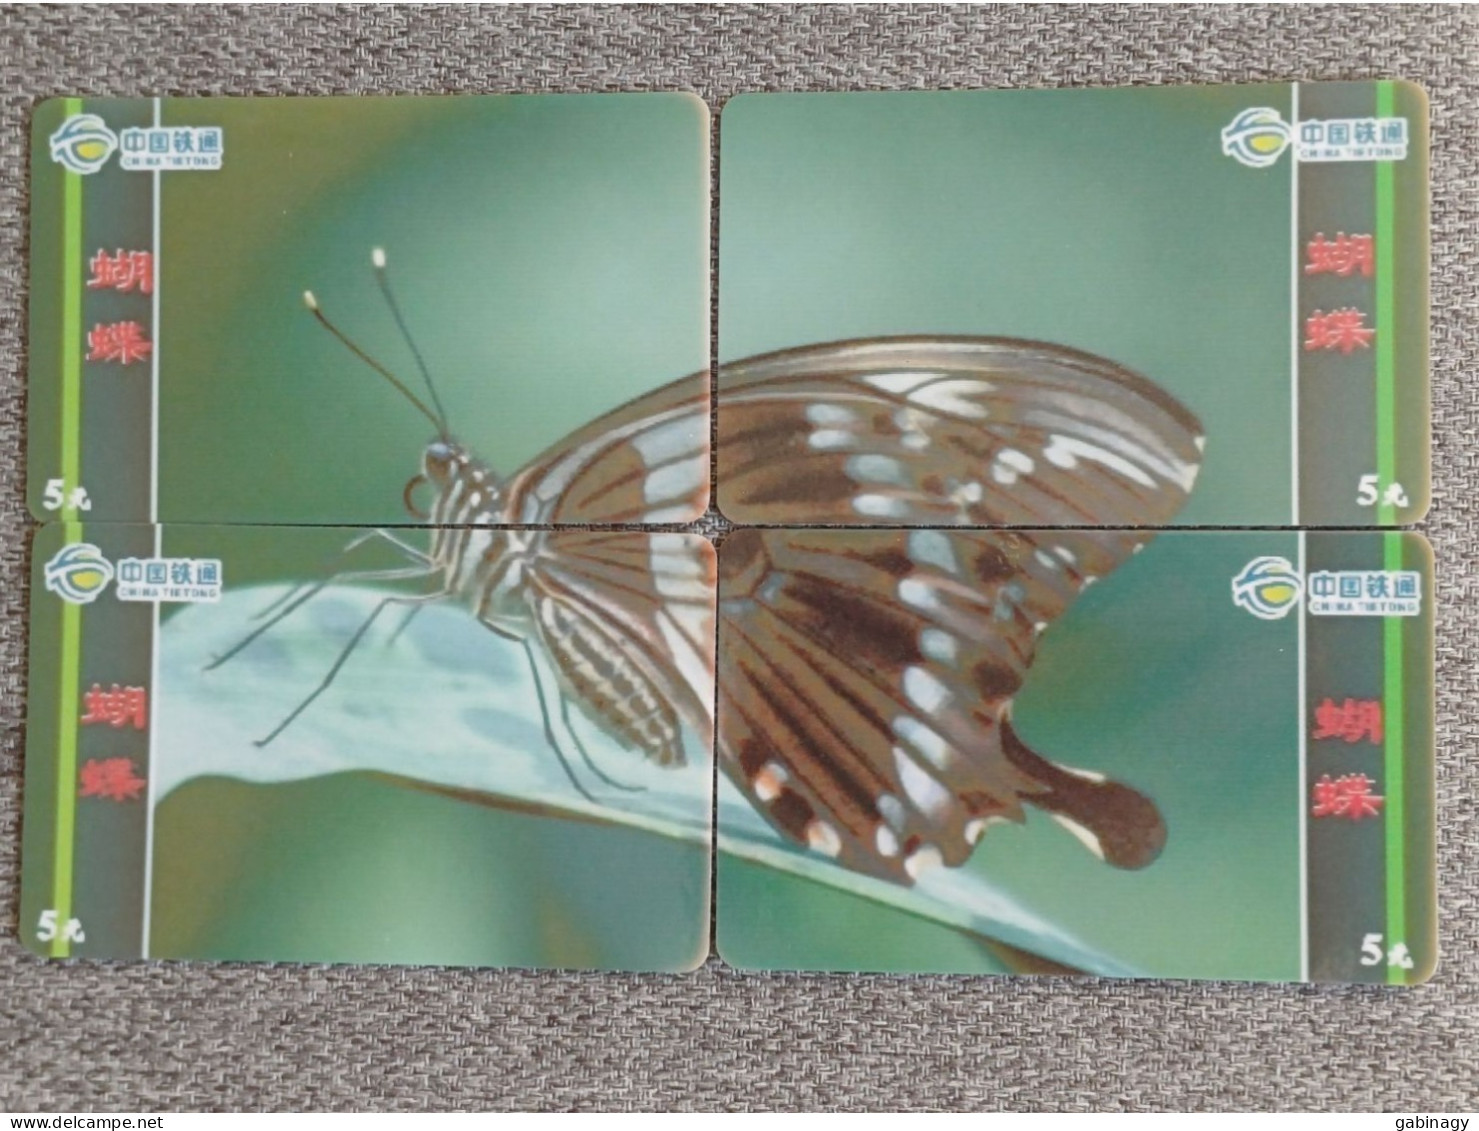 CHINA - BUTTERFLY-07 - PUZZLE SET OF 4 CARDS - China